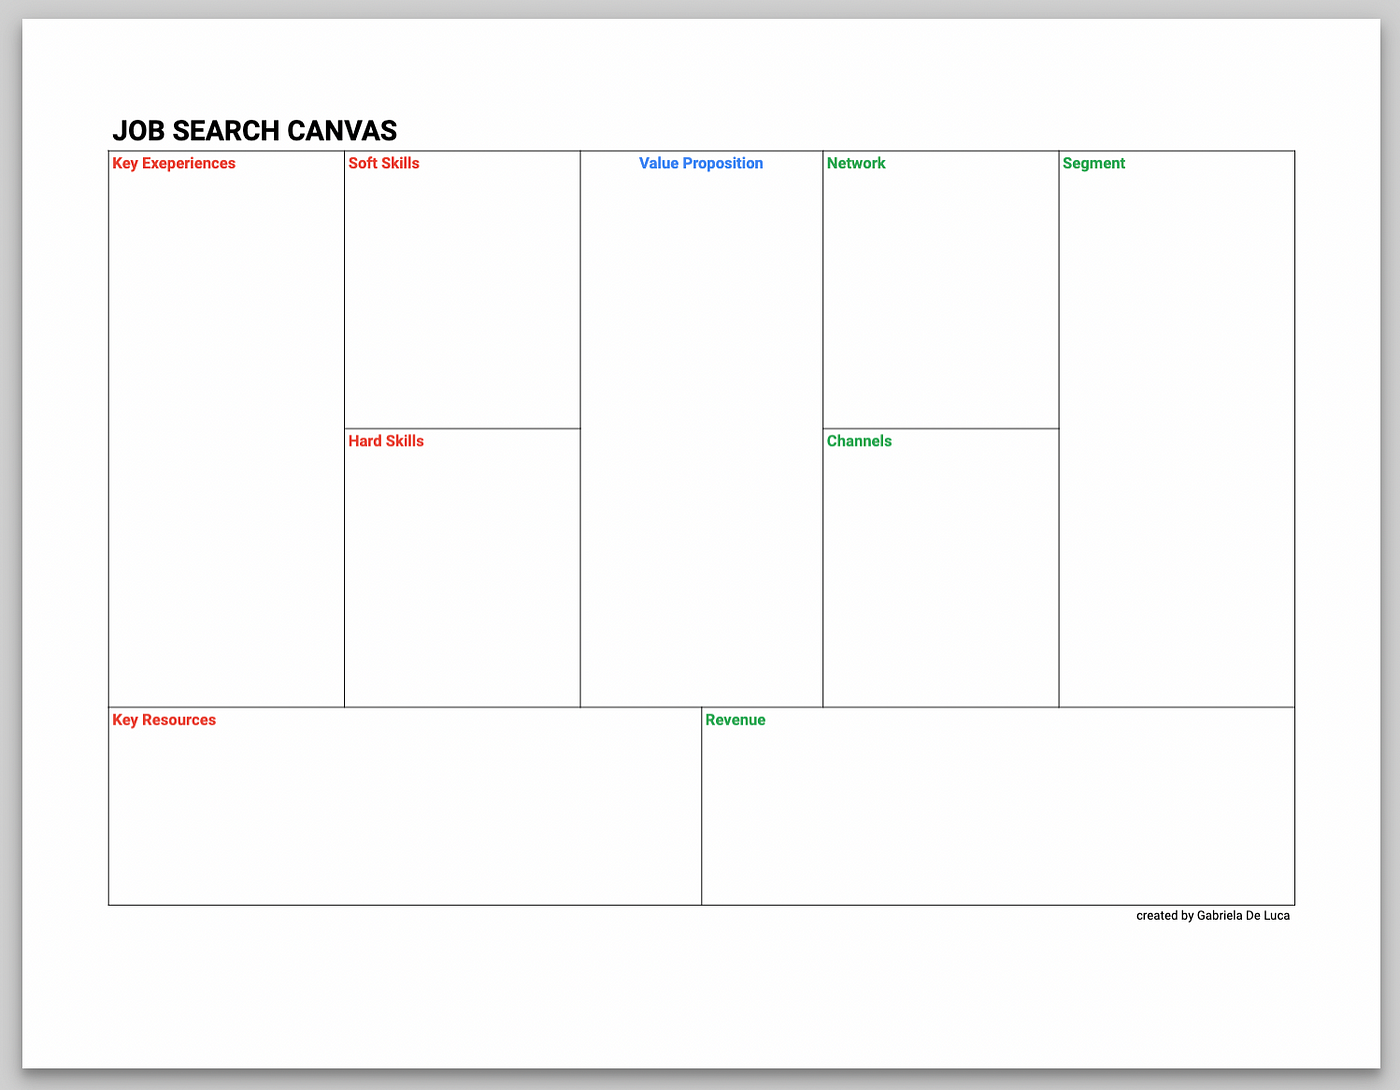 Job search canvas: a framework to guide your job search